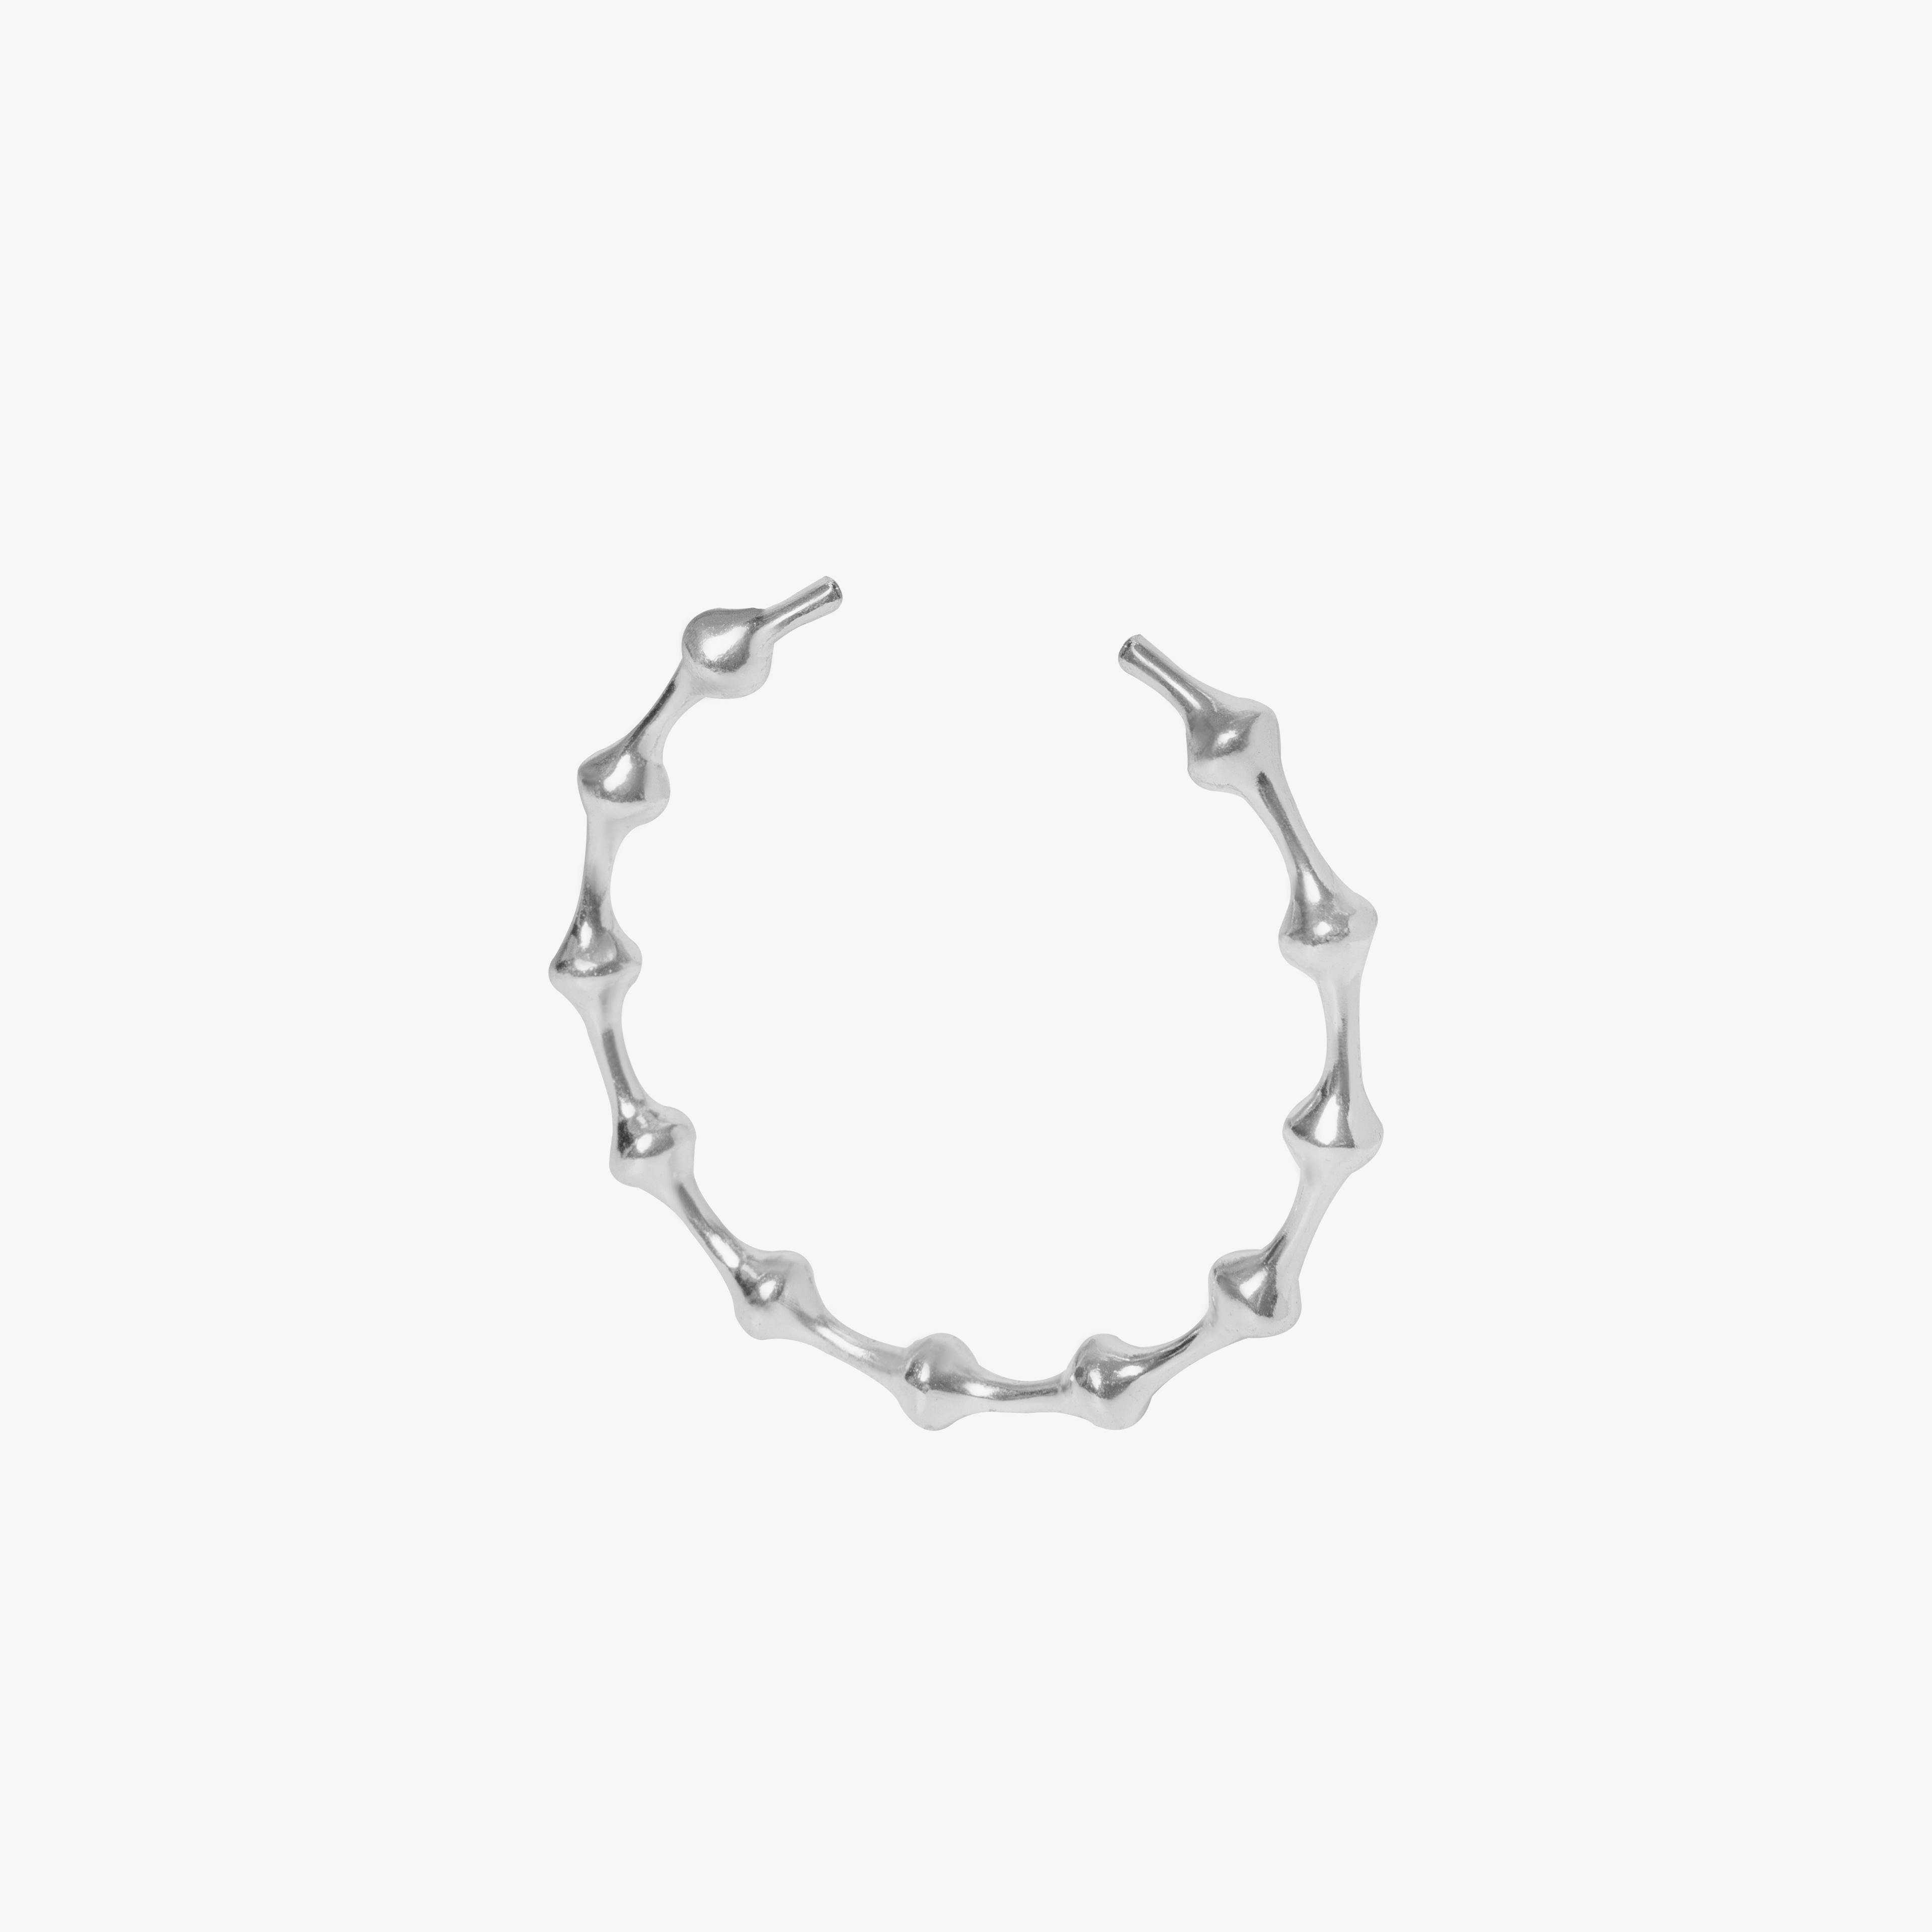 SYMPHONY BANGLE - SILVER TONE, a product by Equiivalence